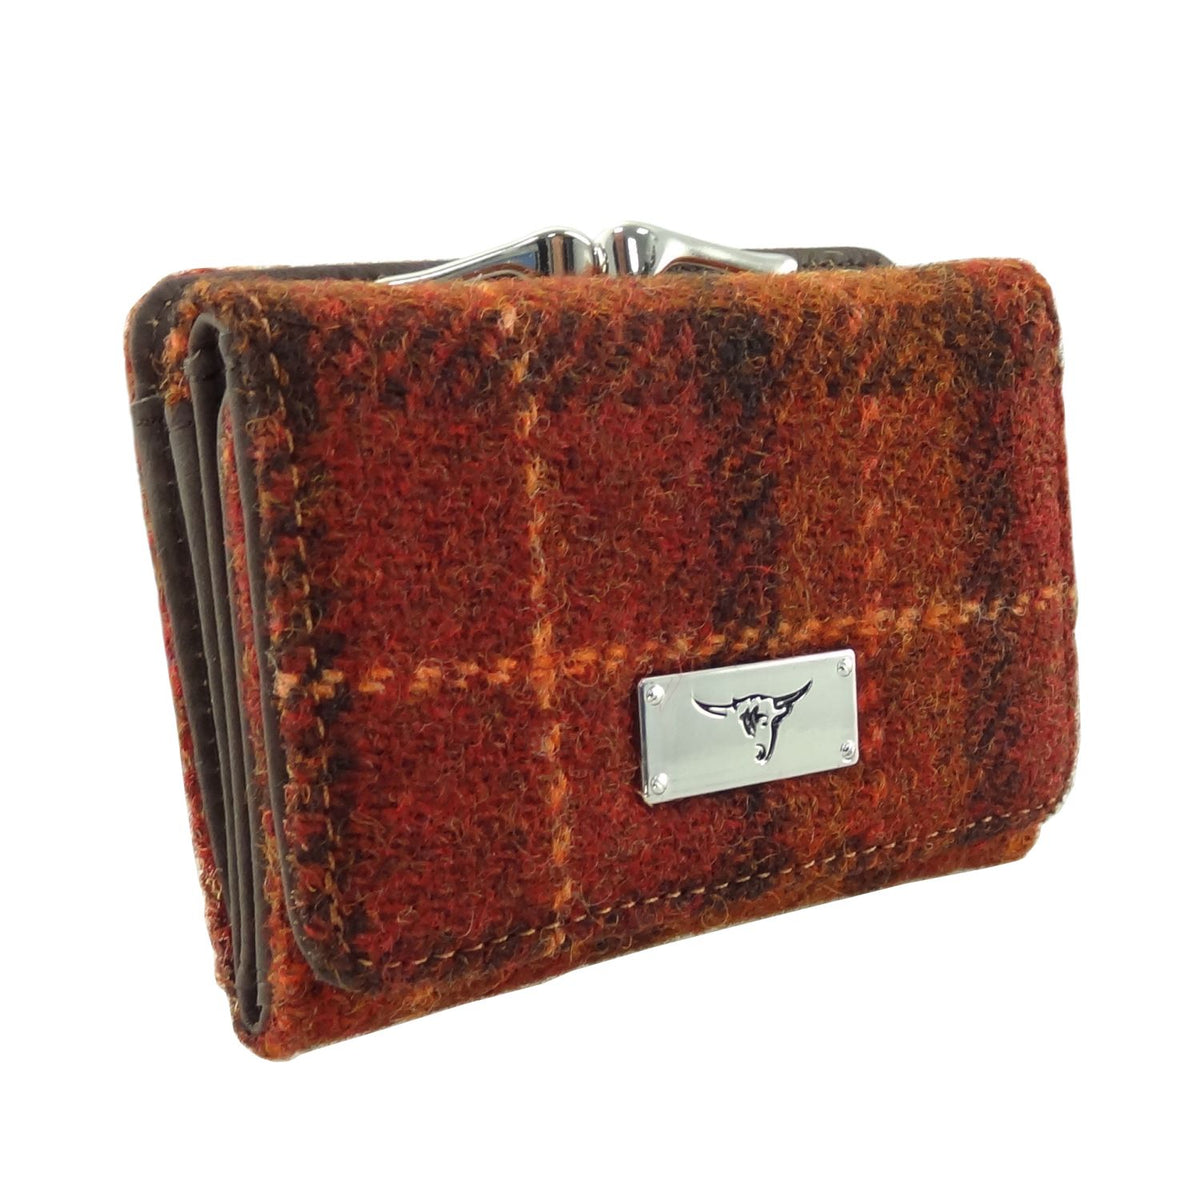 Harris Tweed Small Clasp Purse in Heather Check